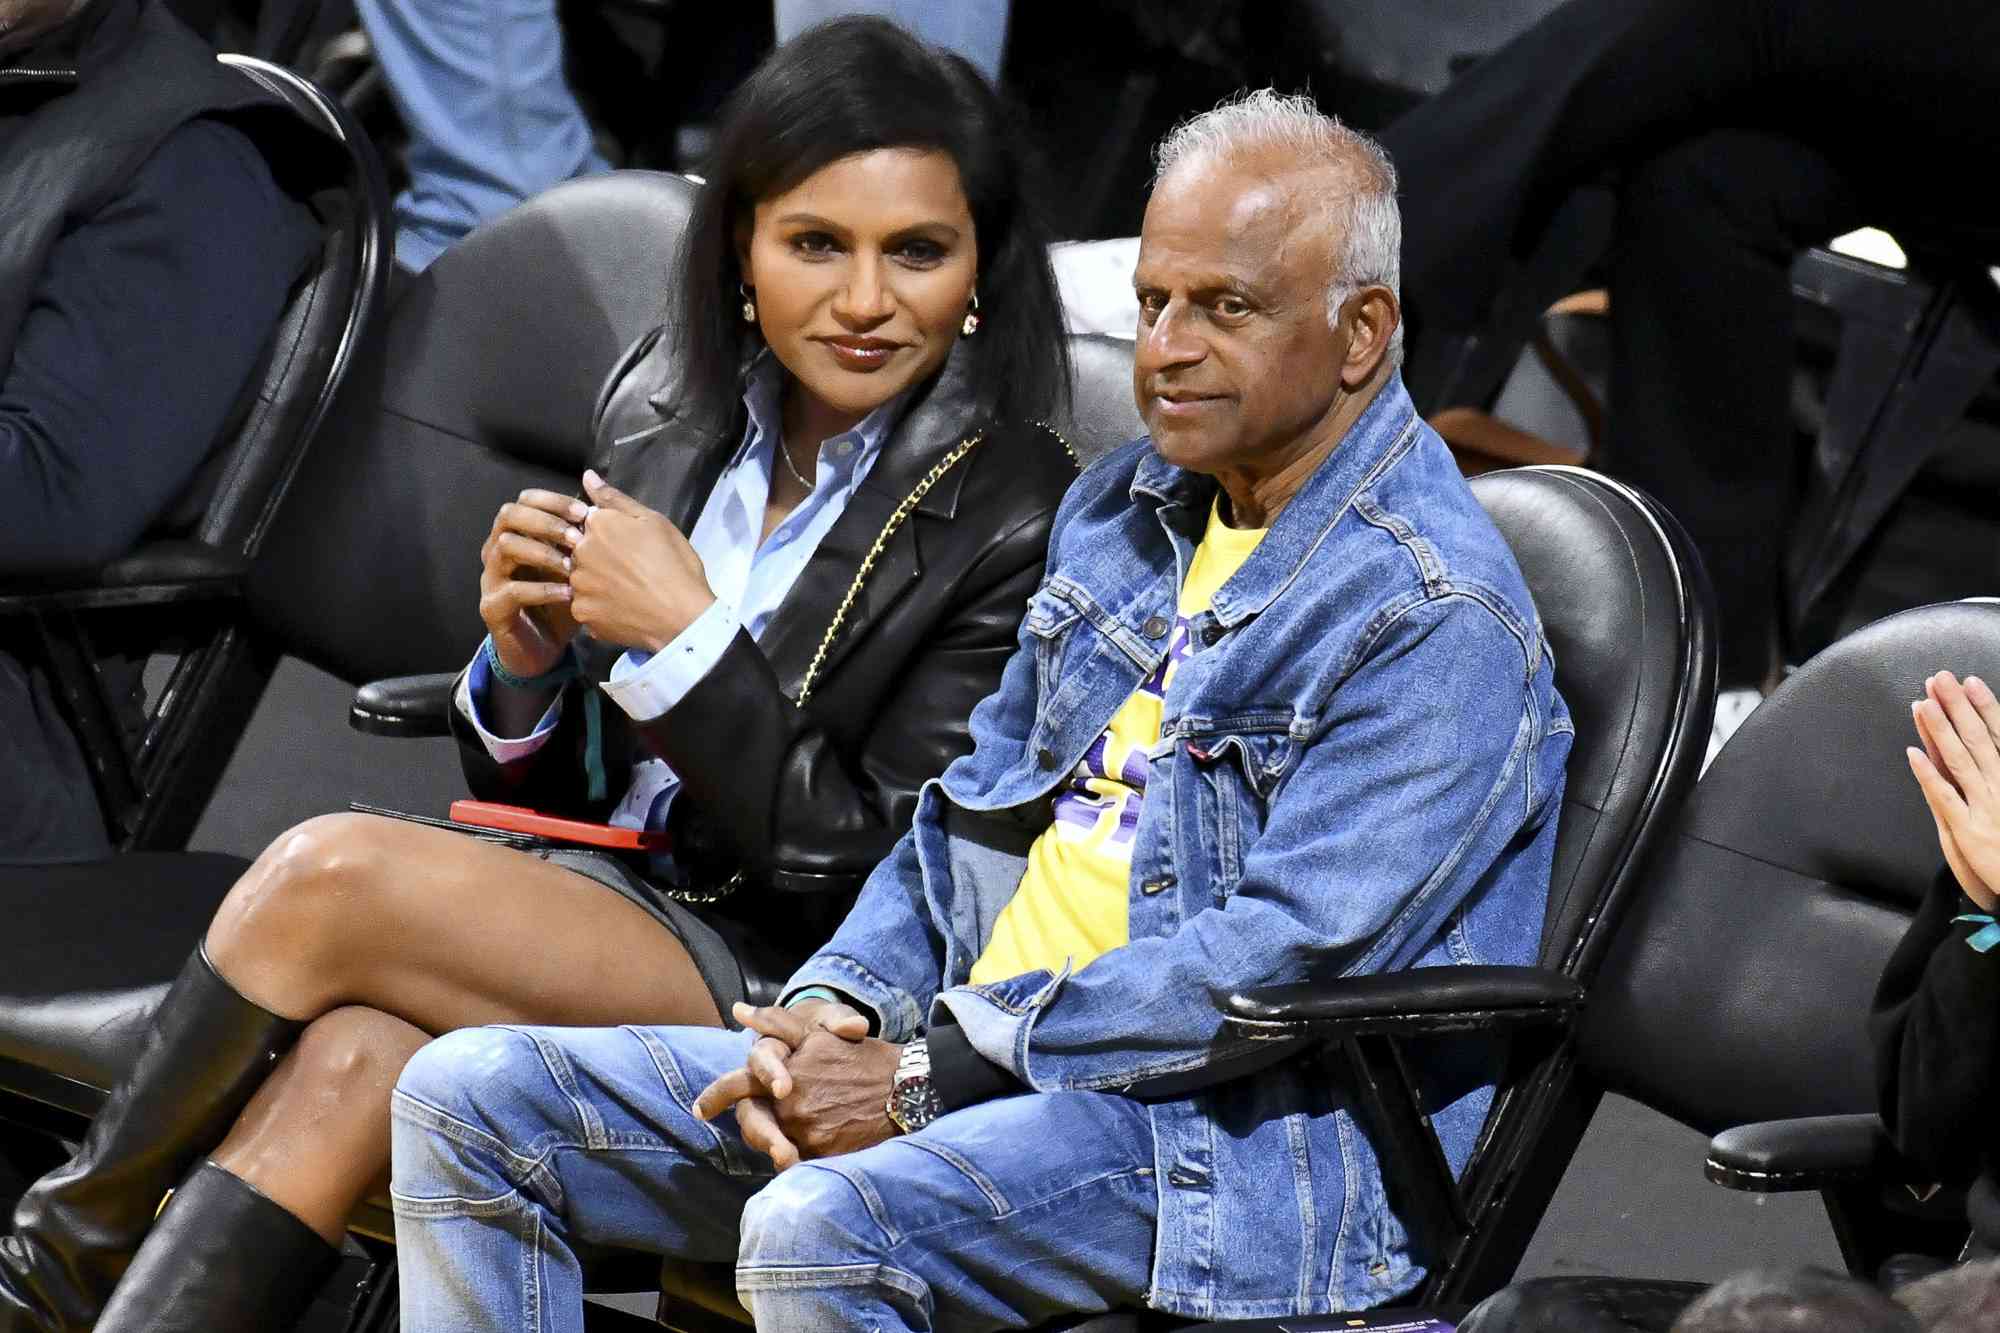 Mindy Kaling and Avu Chokalingam attend a basketball game between the Los Angeles Lakers and the Golden State Warriors at Crypto.com Arena on February 23, 2023 in Los Angeles, California.